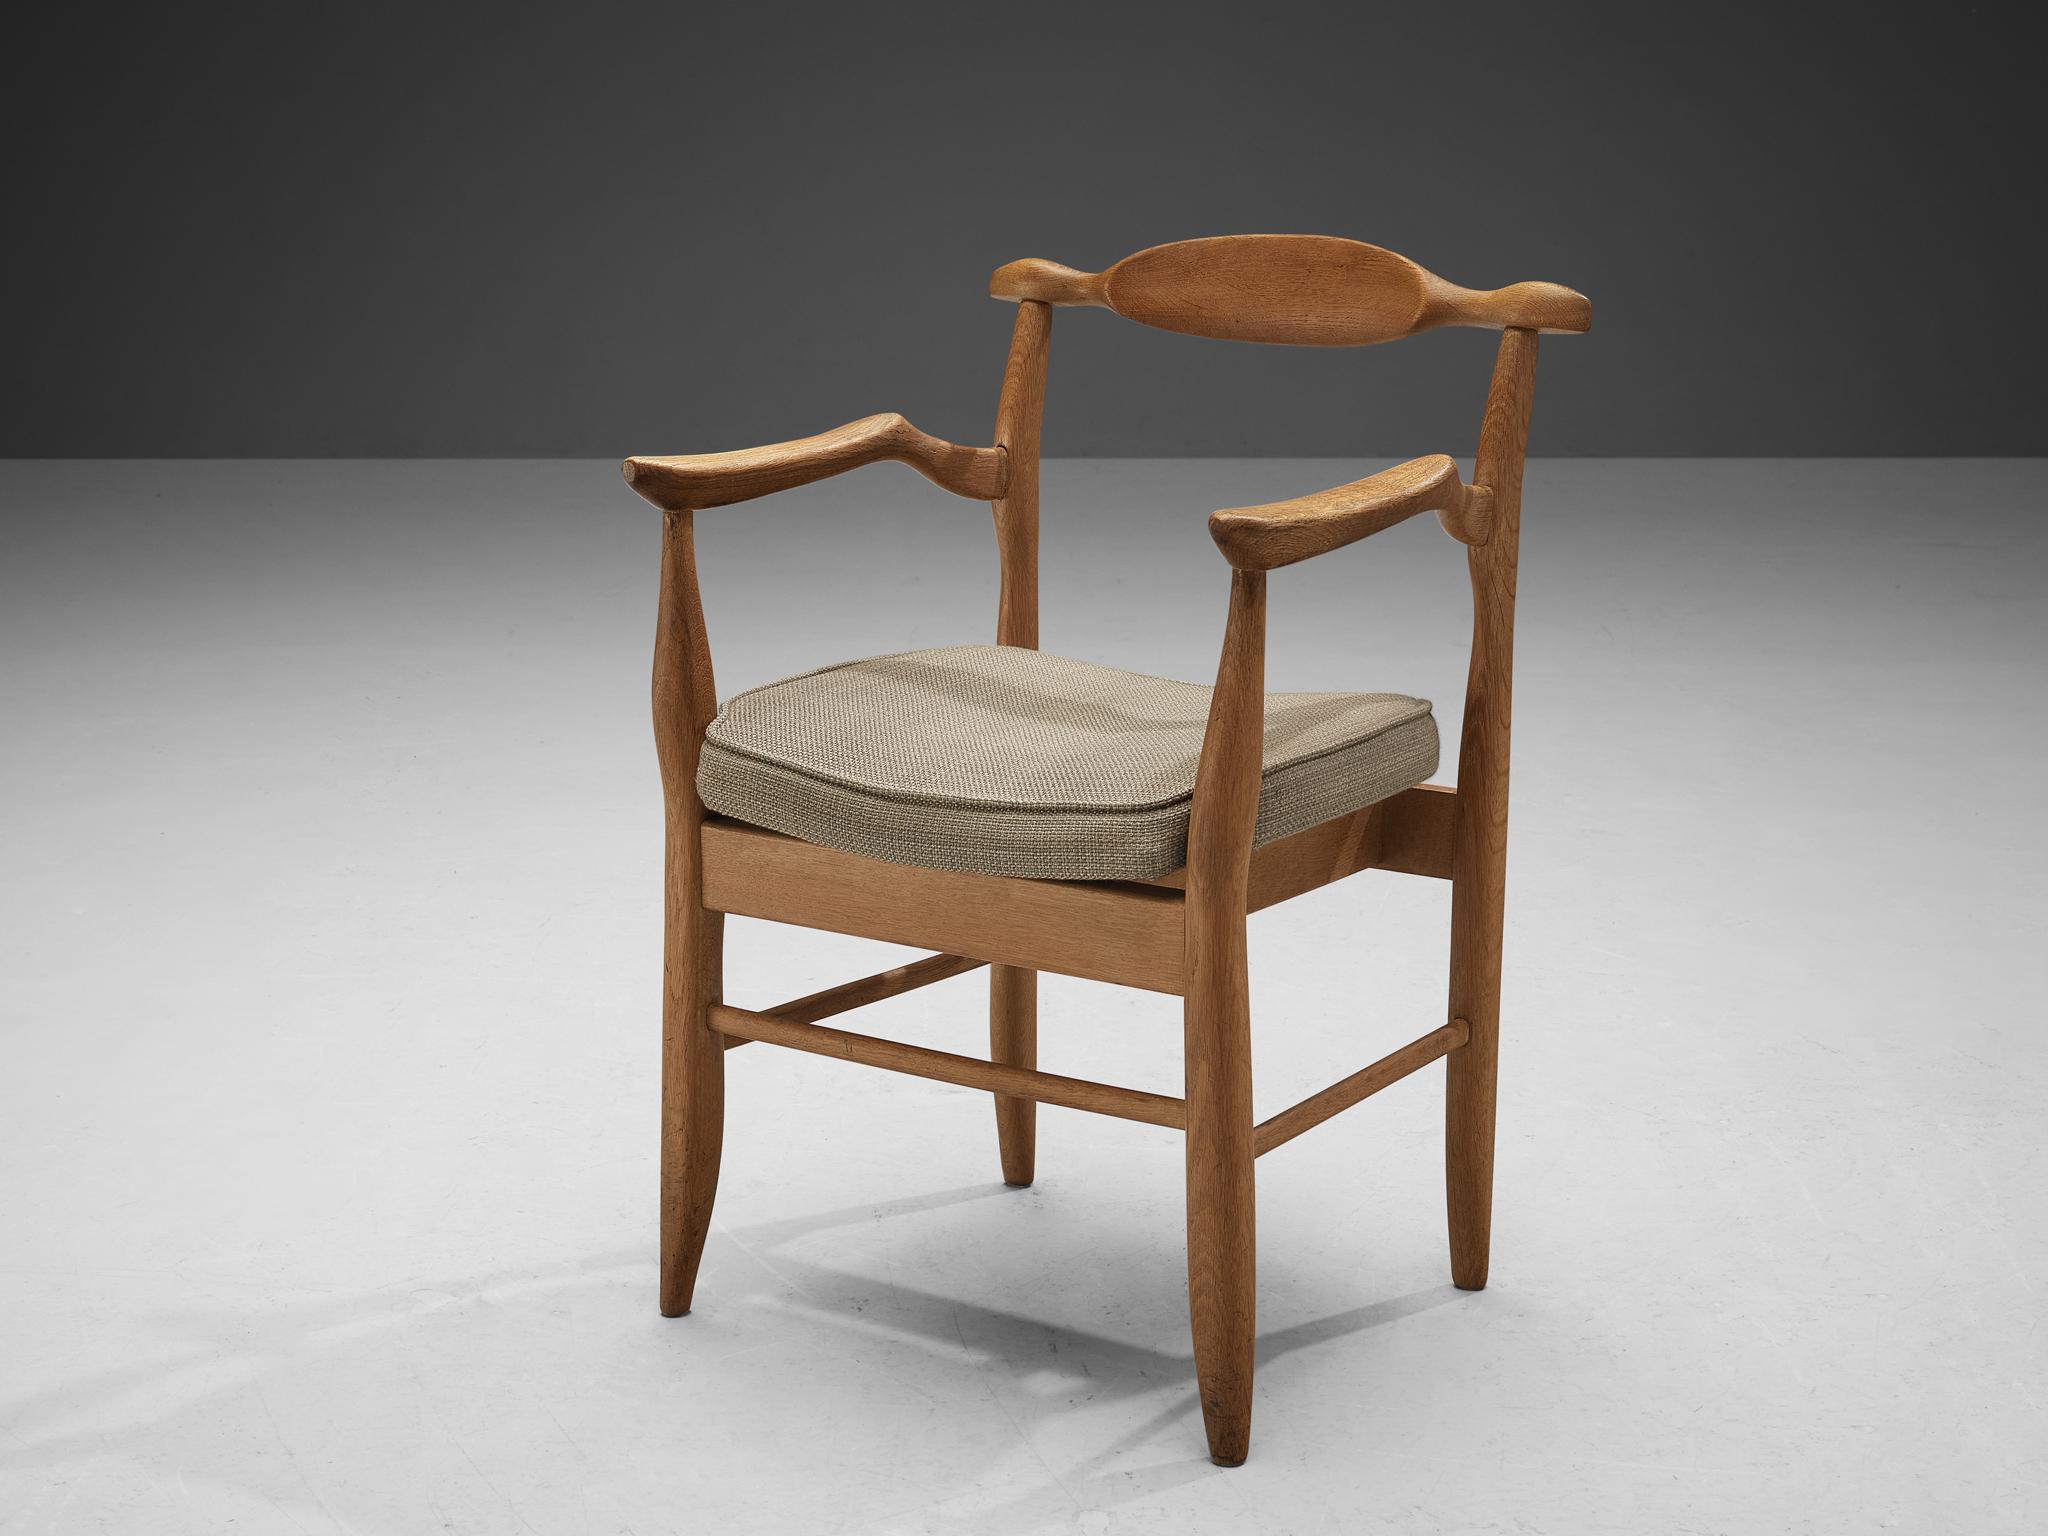 Guillerme et Chambron, armchair model 'Fumay,' oak and fabric, France, 1960s

Beautifully shaped armchair in blond oak by French designer duo Jacques Chambron and Robert Guillerme. This chair shows beautiful lines in every element. Starting with the